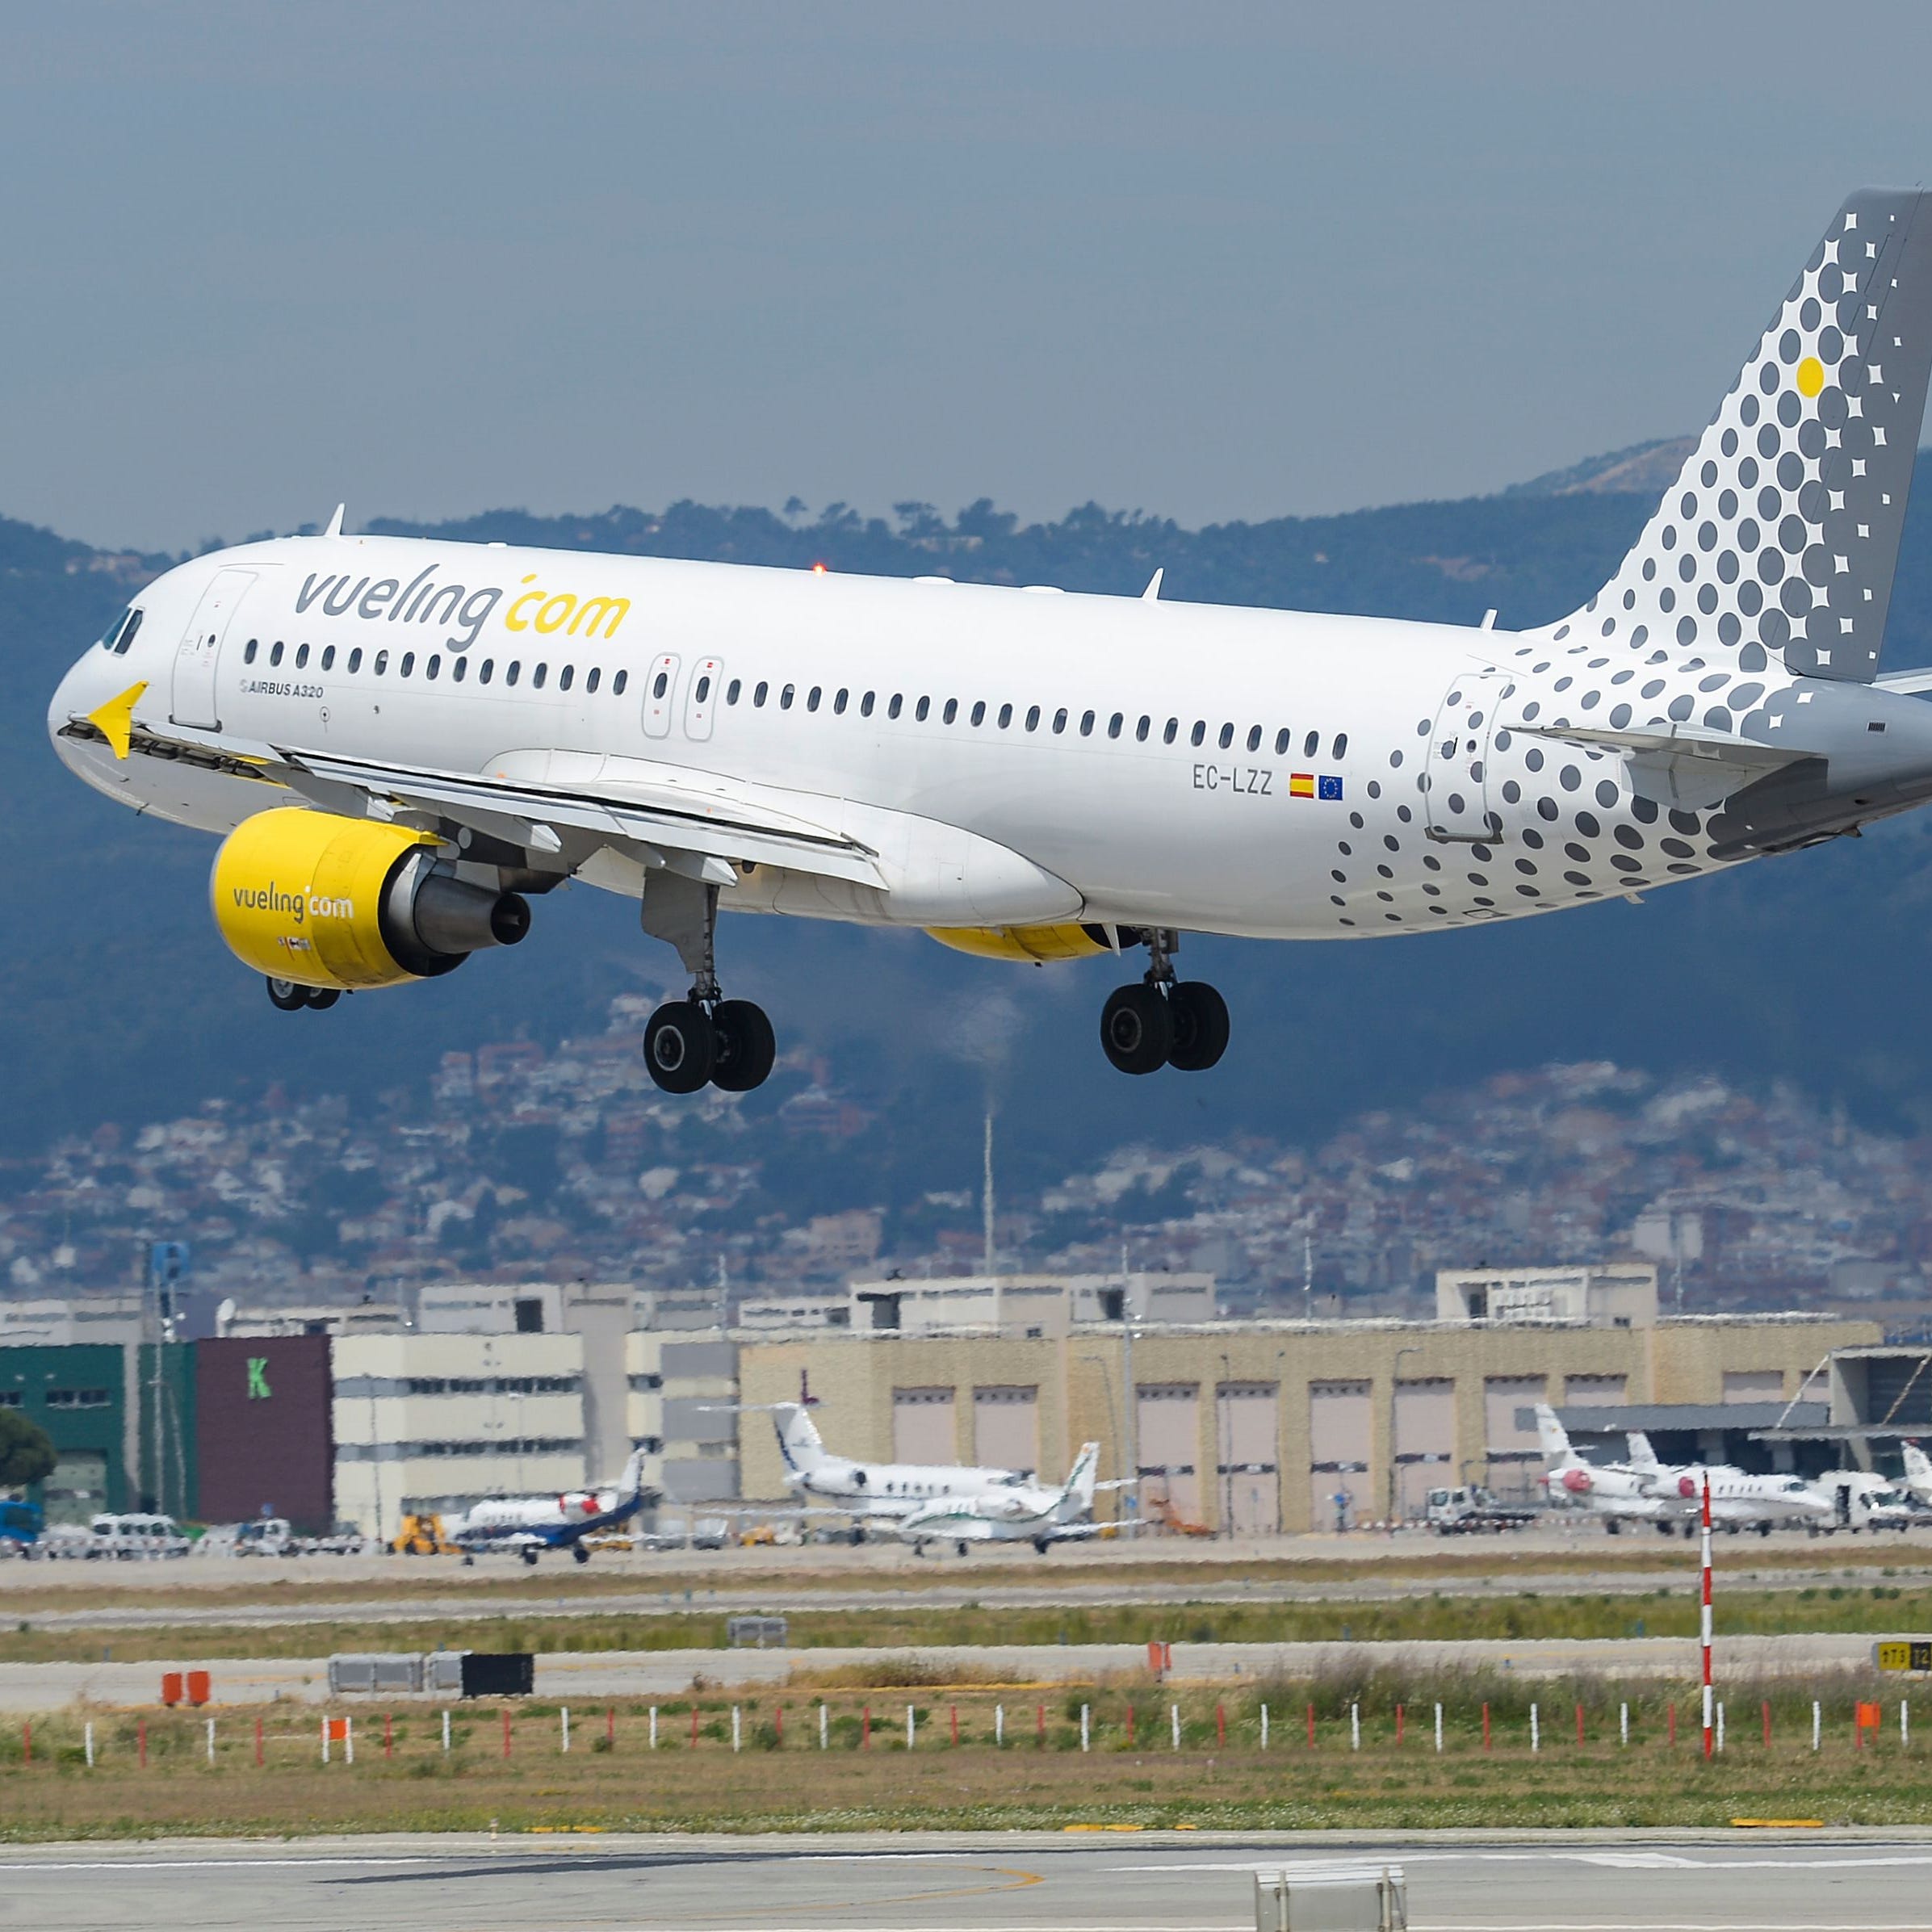 An airplane of the Spanish low-cost airline Vueling lands at Barcelona's airport in El Prat de Llobregat on June 6, 2016. (JOSEP LAGO/AFP/Getty Images)